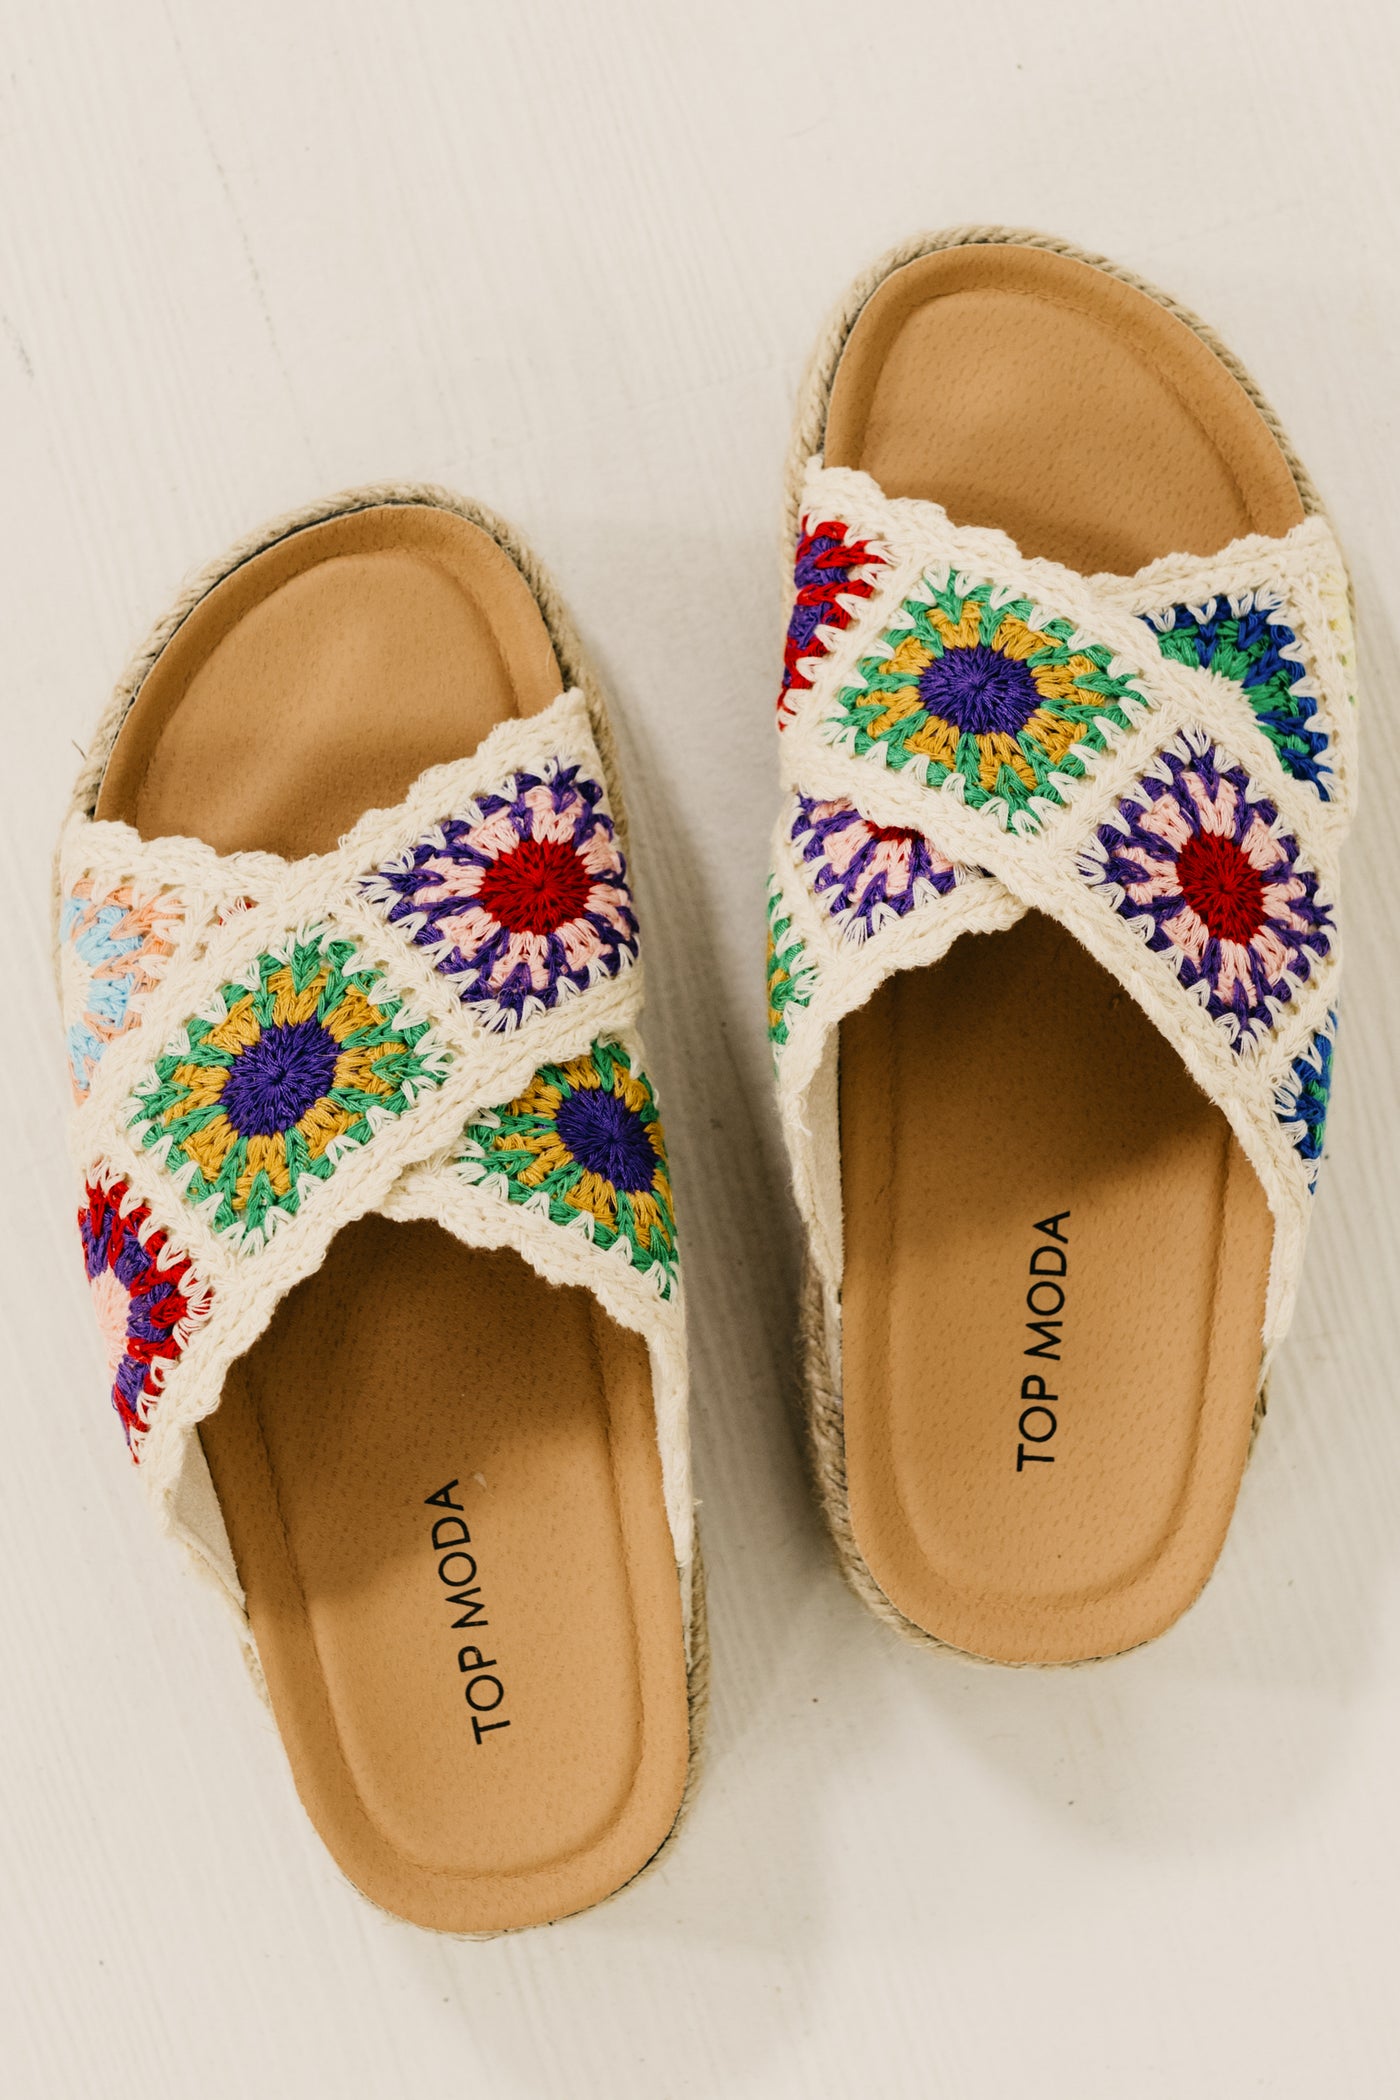 The Athens Espadrille Embroidered Sandal